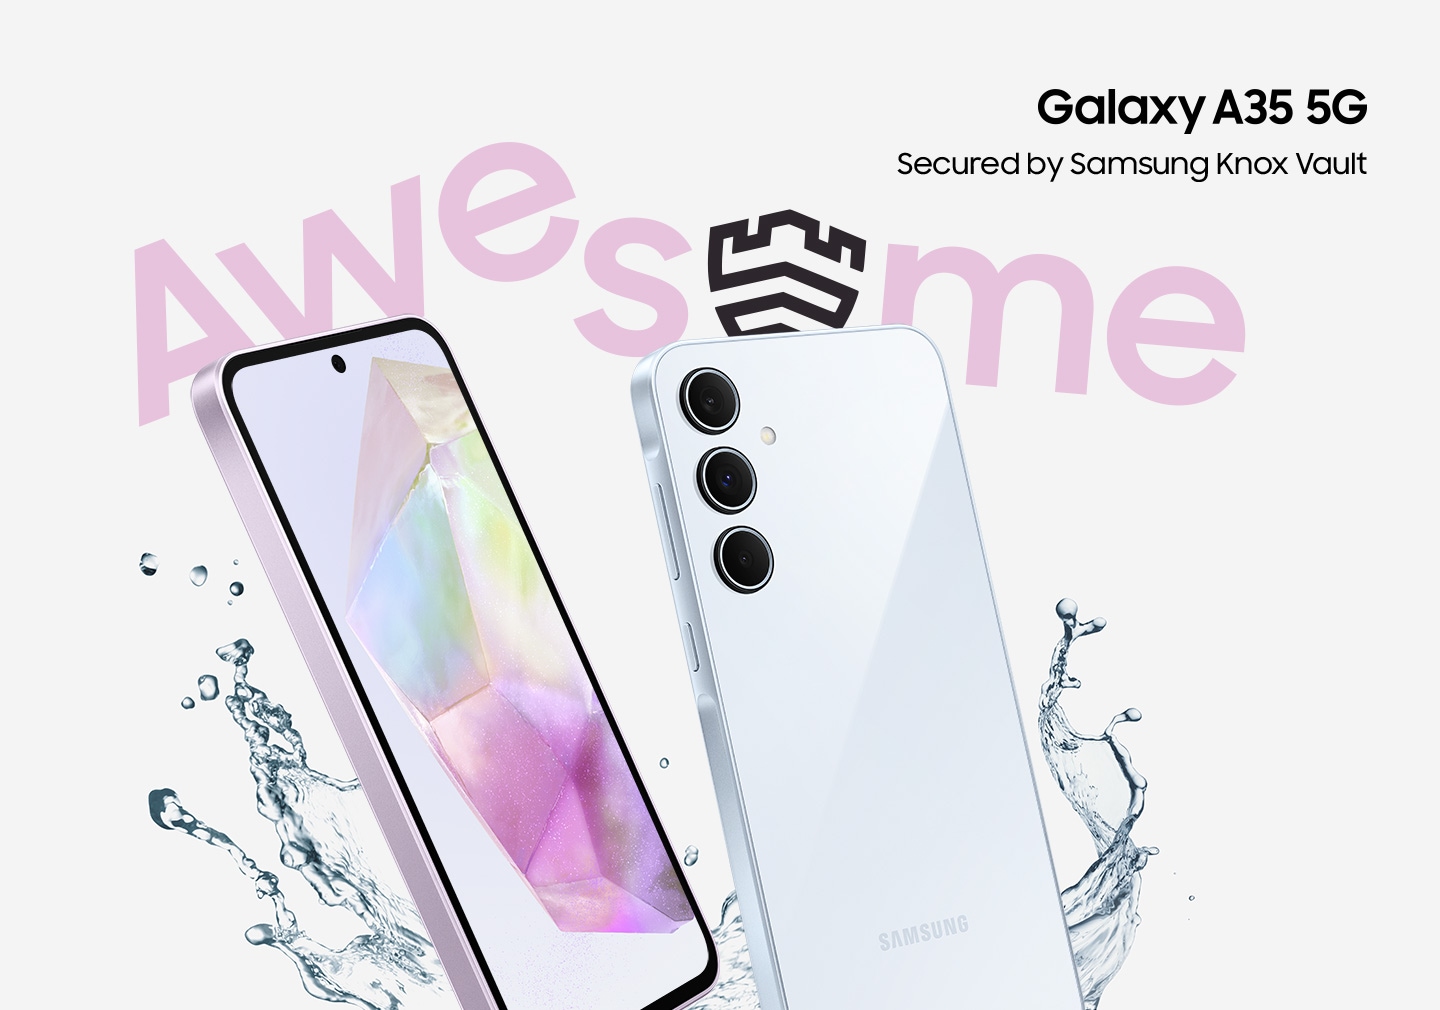 Two Samsung Galaxy A35 5G shown at an angle with water splashes around them with the word 'AWESOME'. The phone's screen displays a gradient wallpaper, and the back has a triple camera layout. Galaxy A35 5G logo. Text reads Secured by Samsung Knox Vault.